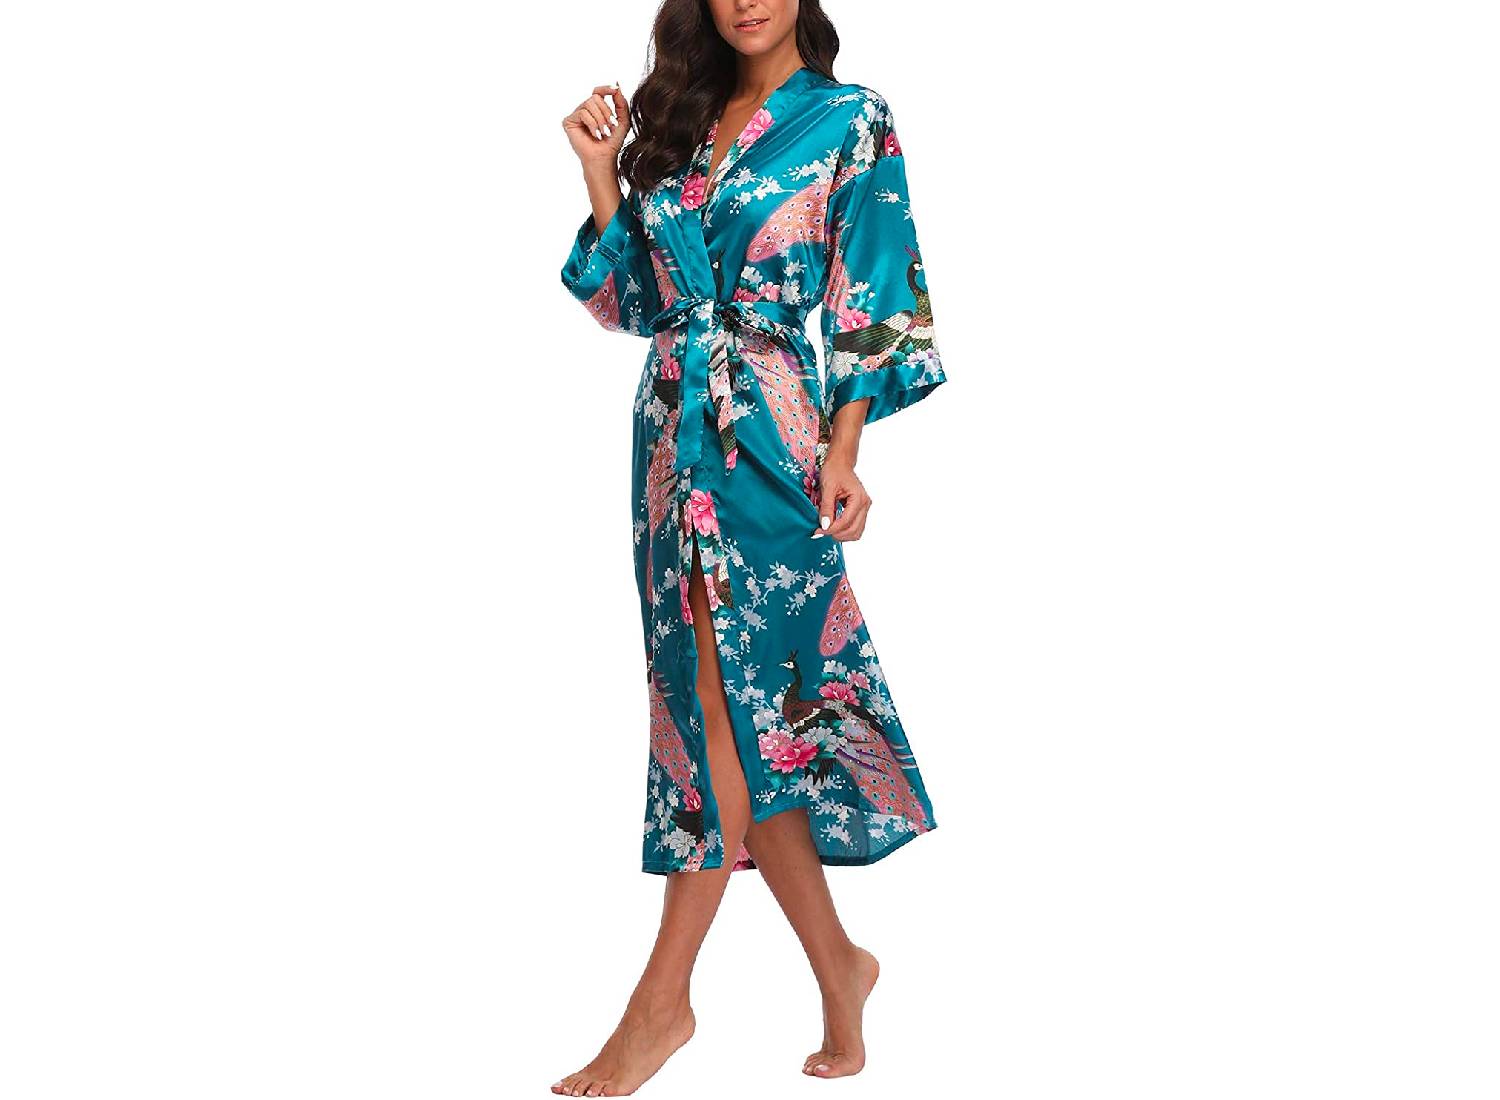 A woman wearing a teal colored robe with a peacock and pink and white blossom print